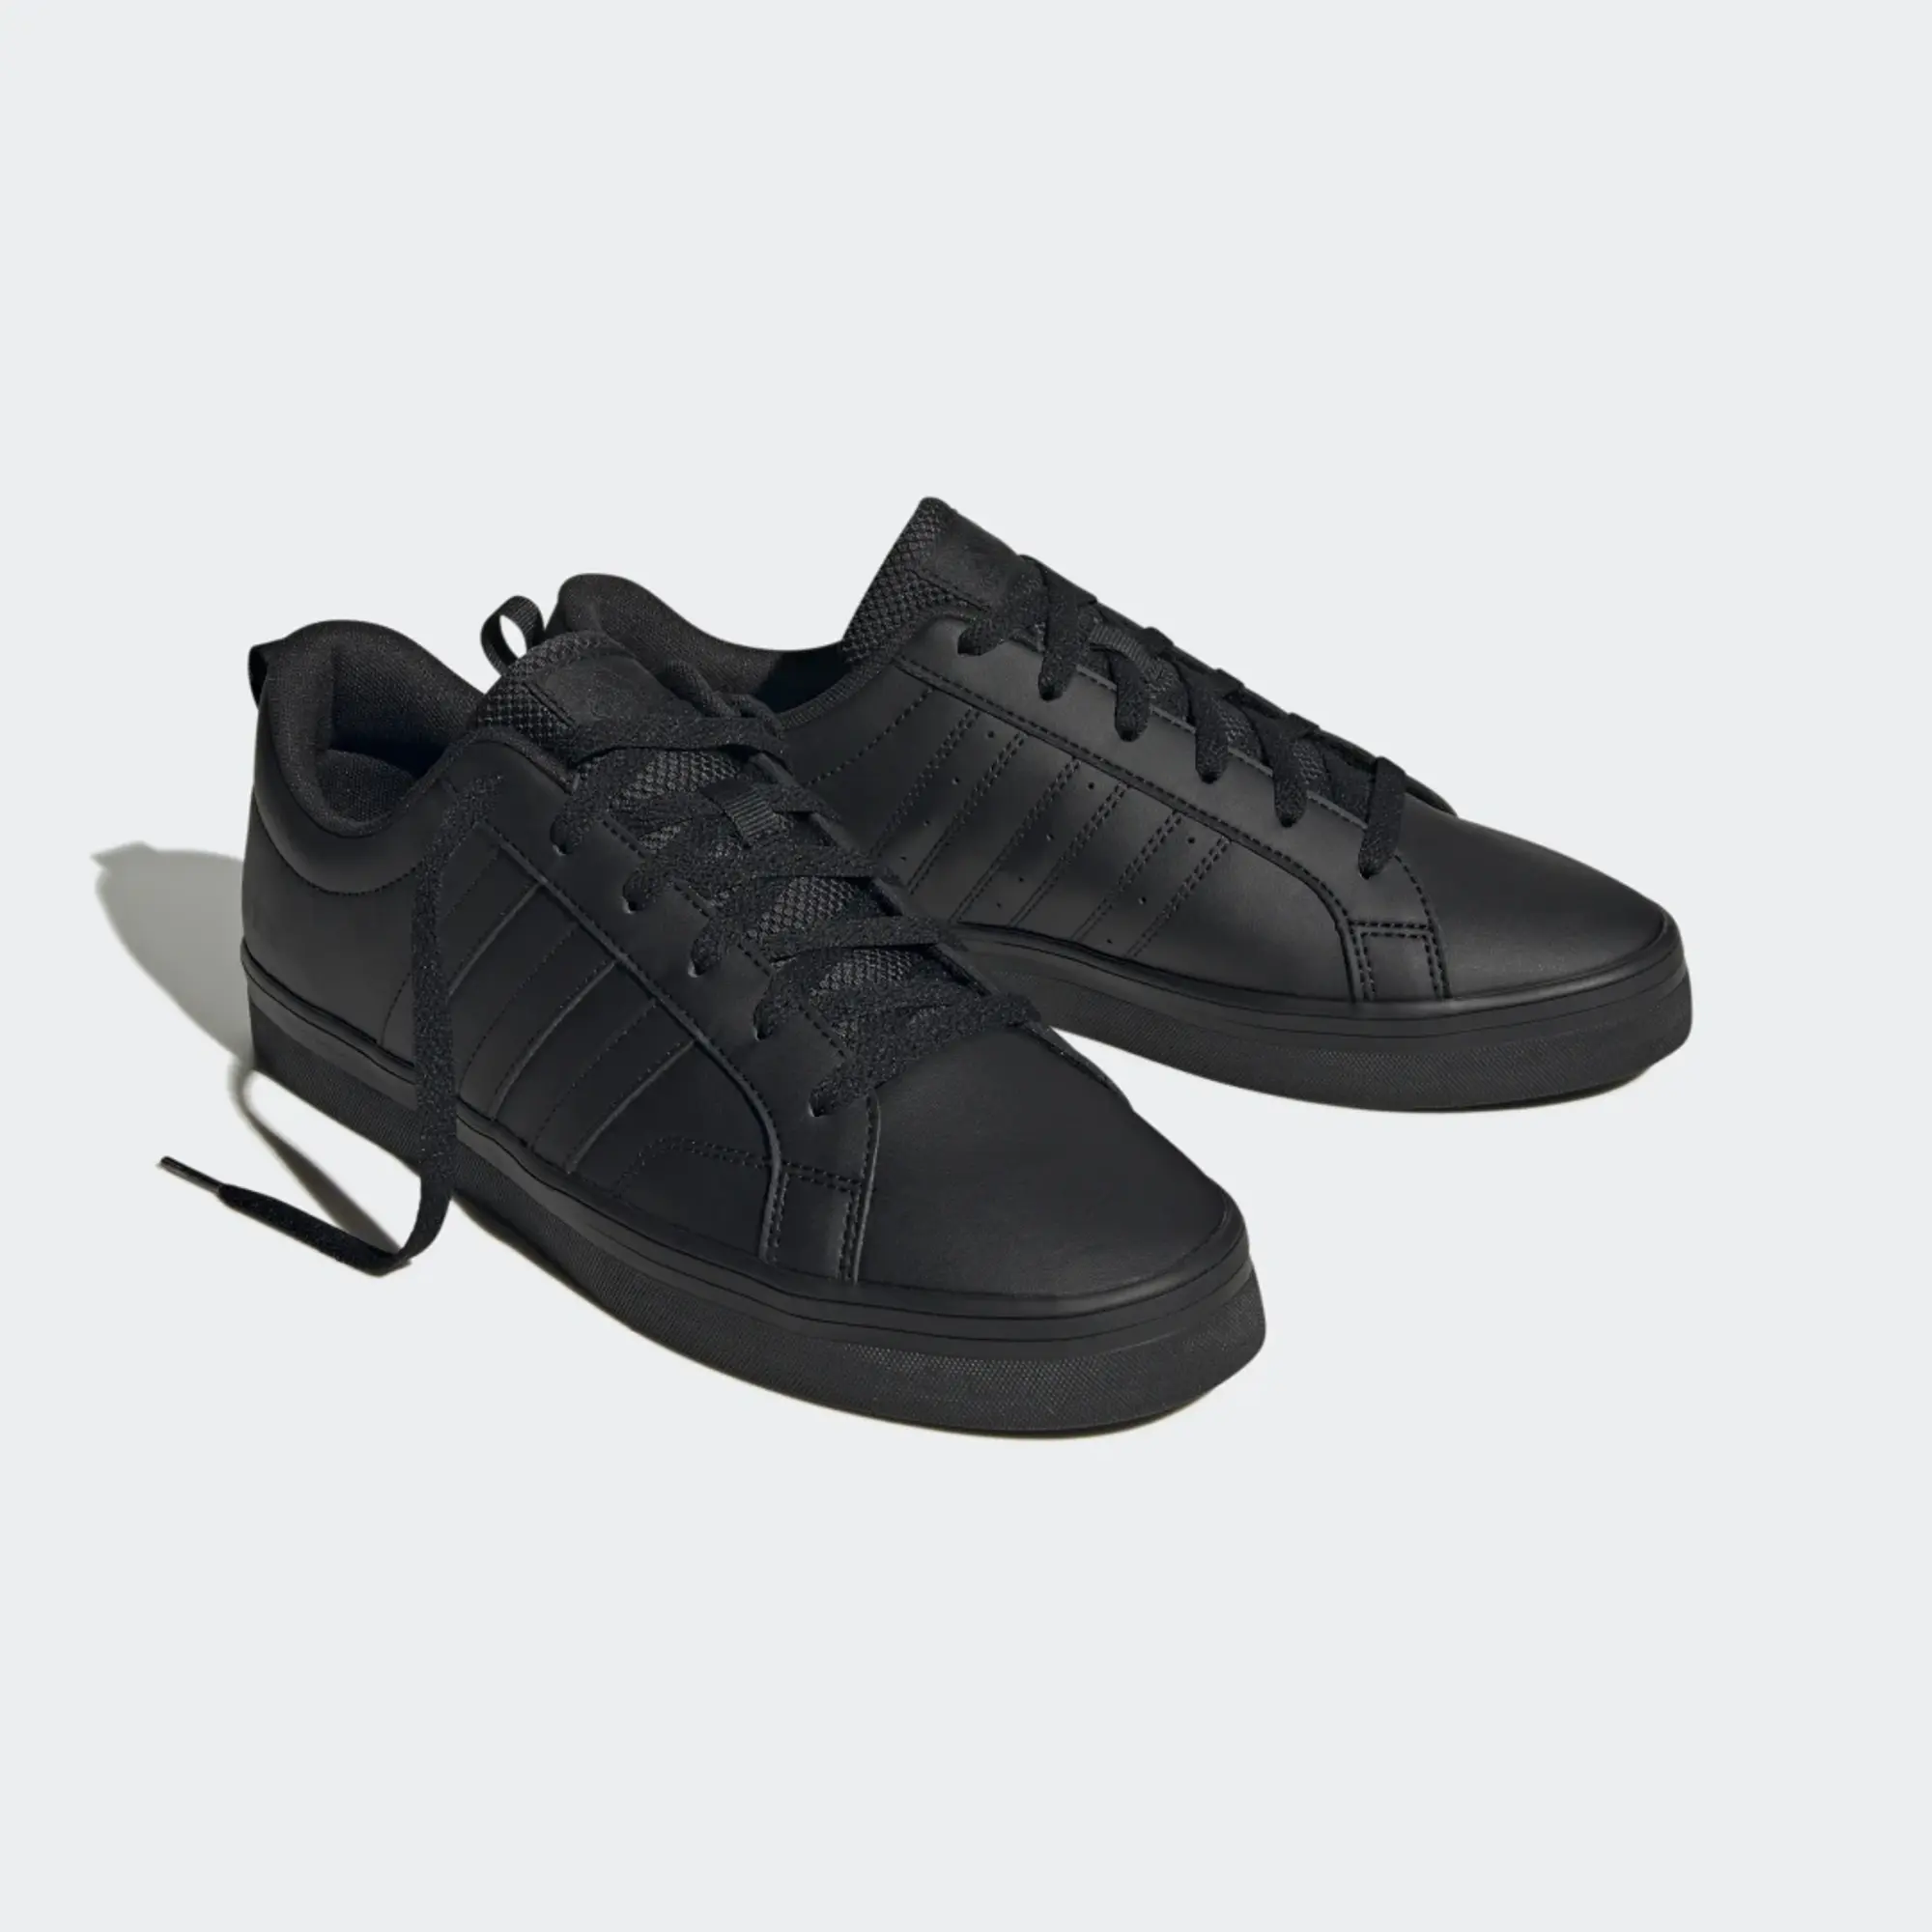 Adidas Vs Pace 2.0 Trainers  - Black